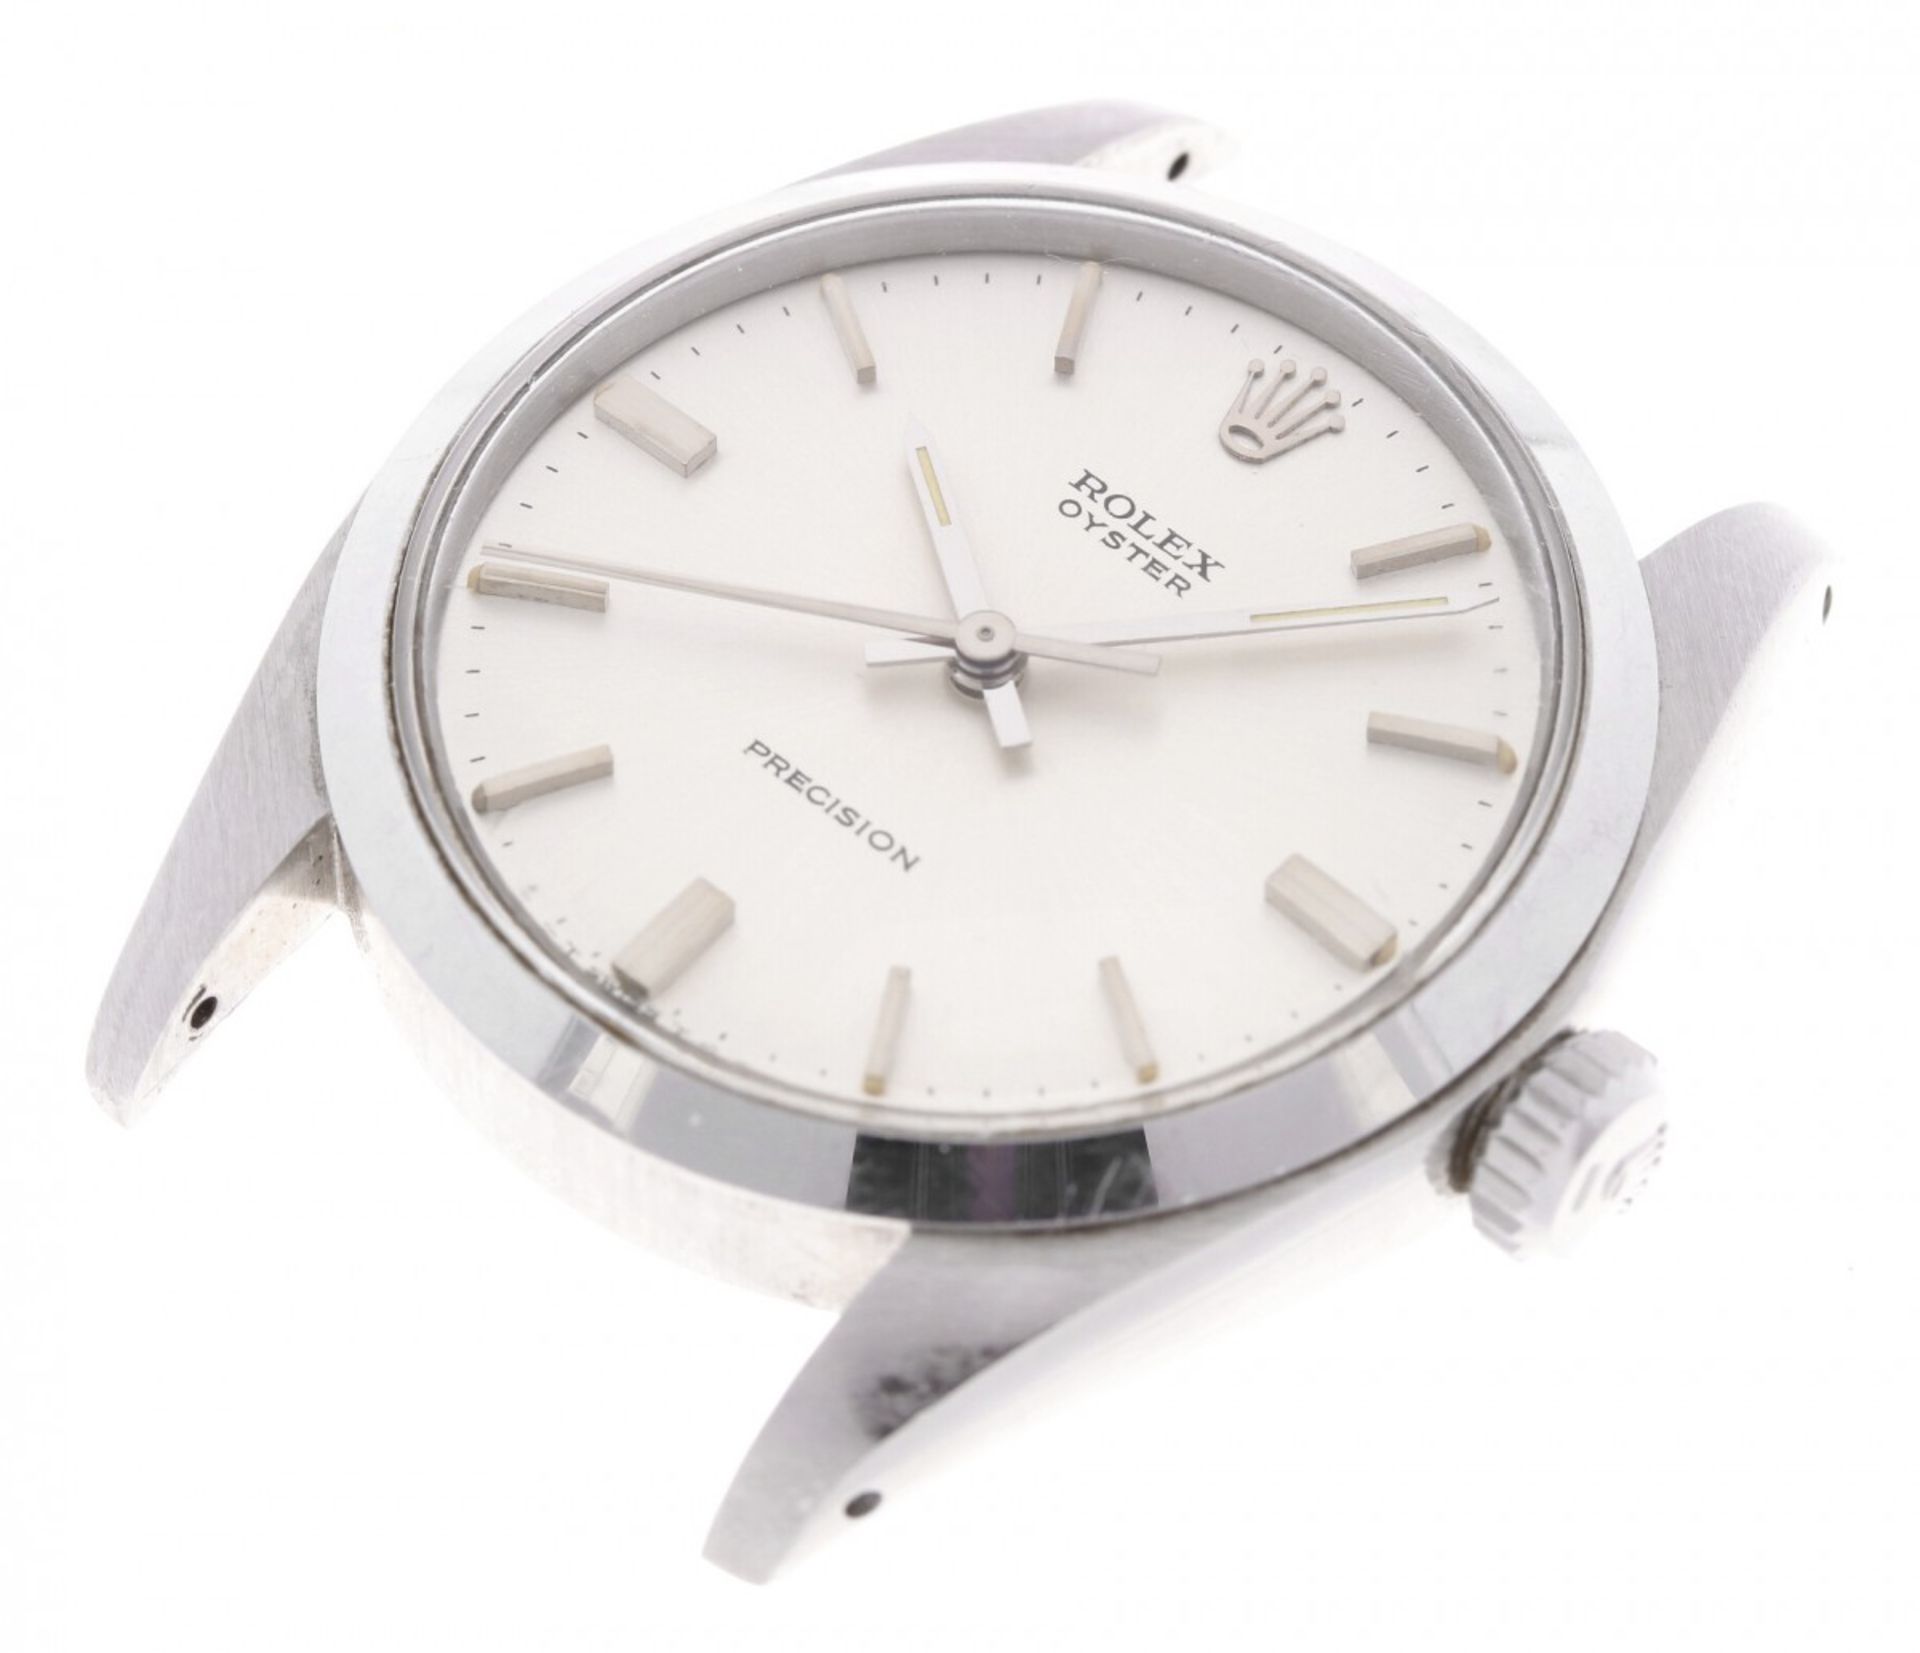 Rolex Oyster Precision 6426 - Men's watch - ca. 1973 - Image 7 of 8